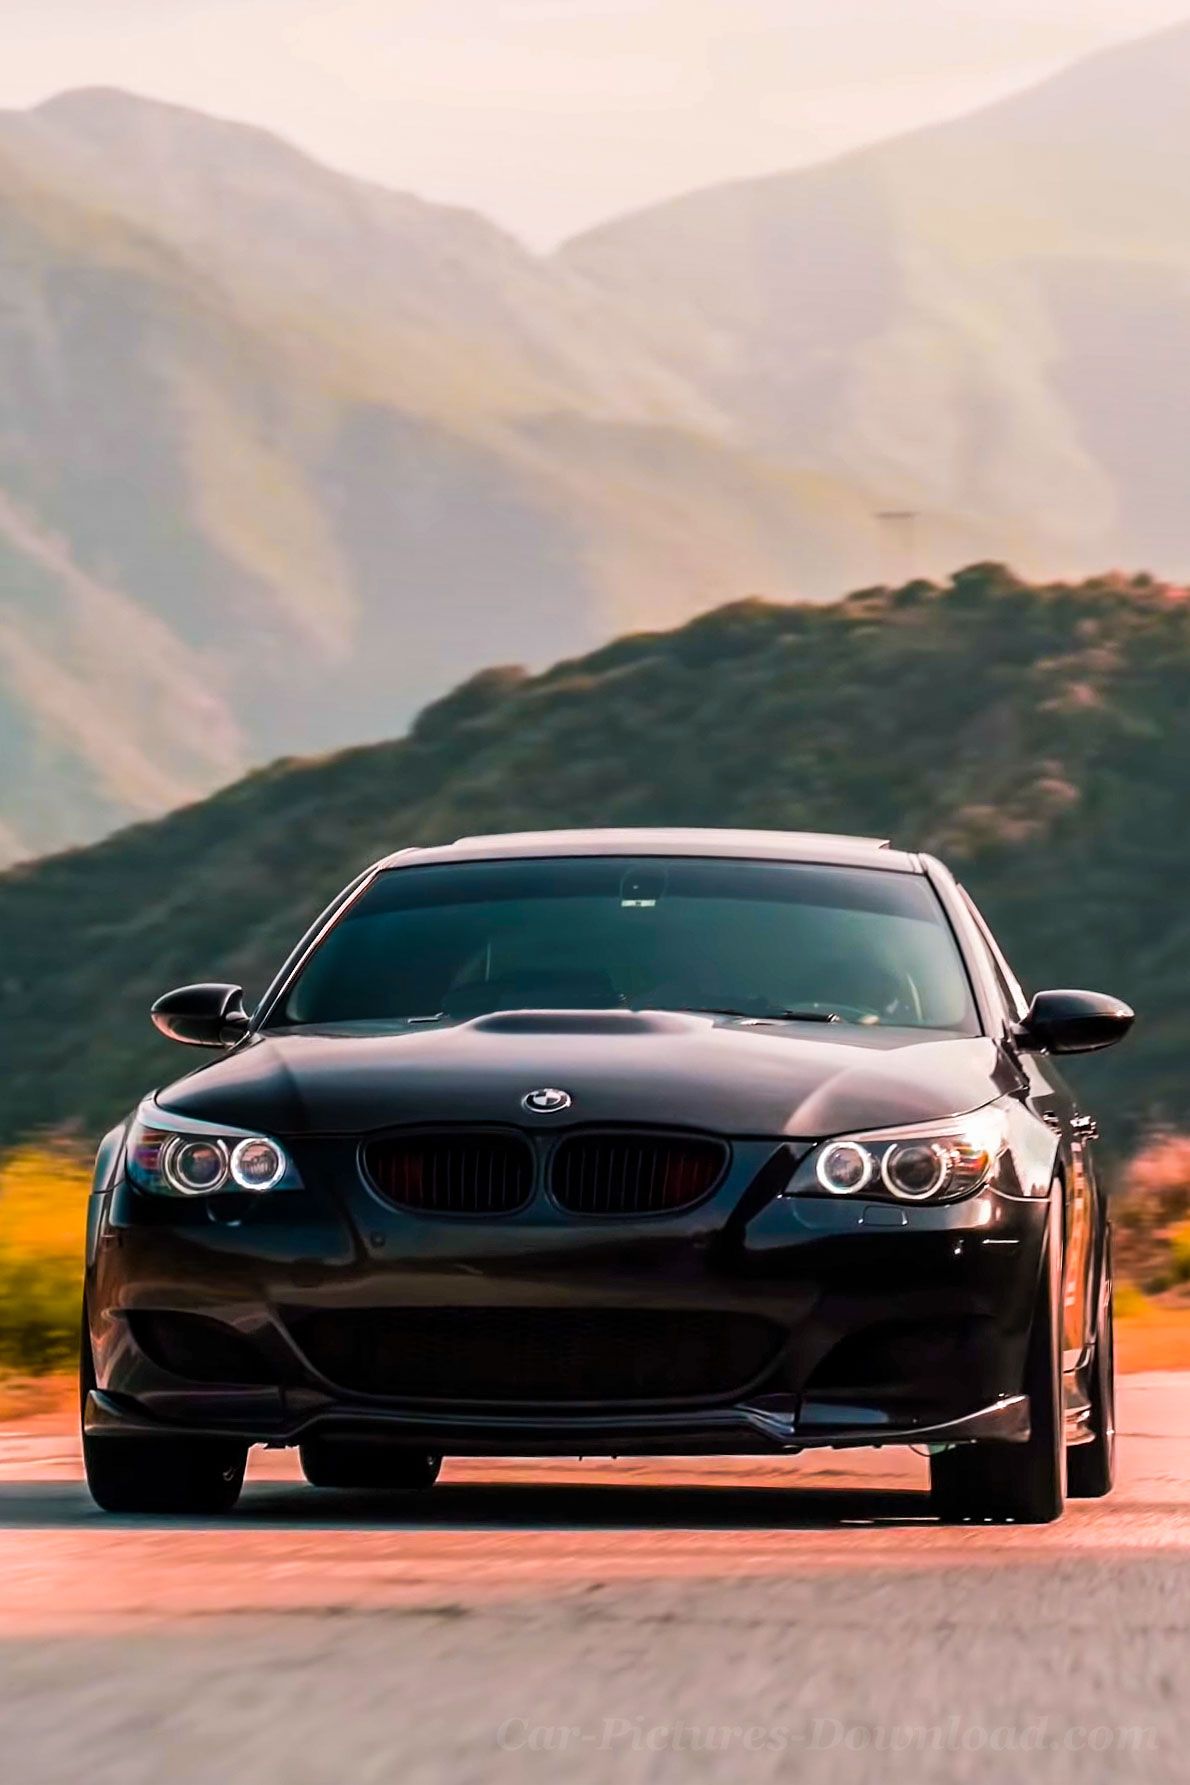 BMW M5 Wallpaper Image & Mobile Device Picture Download